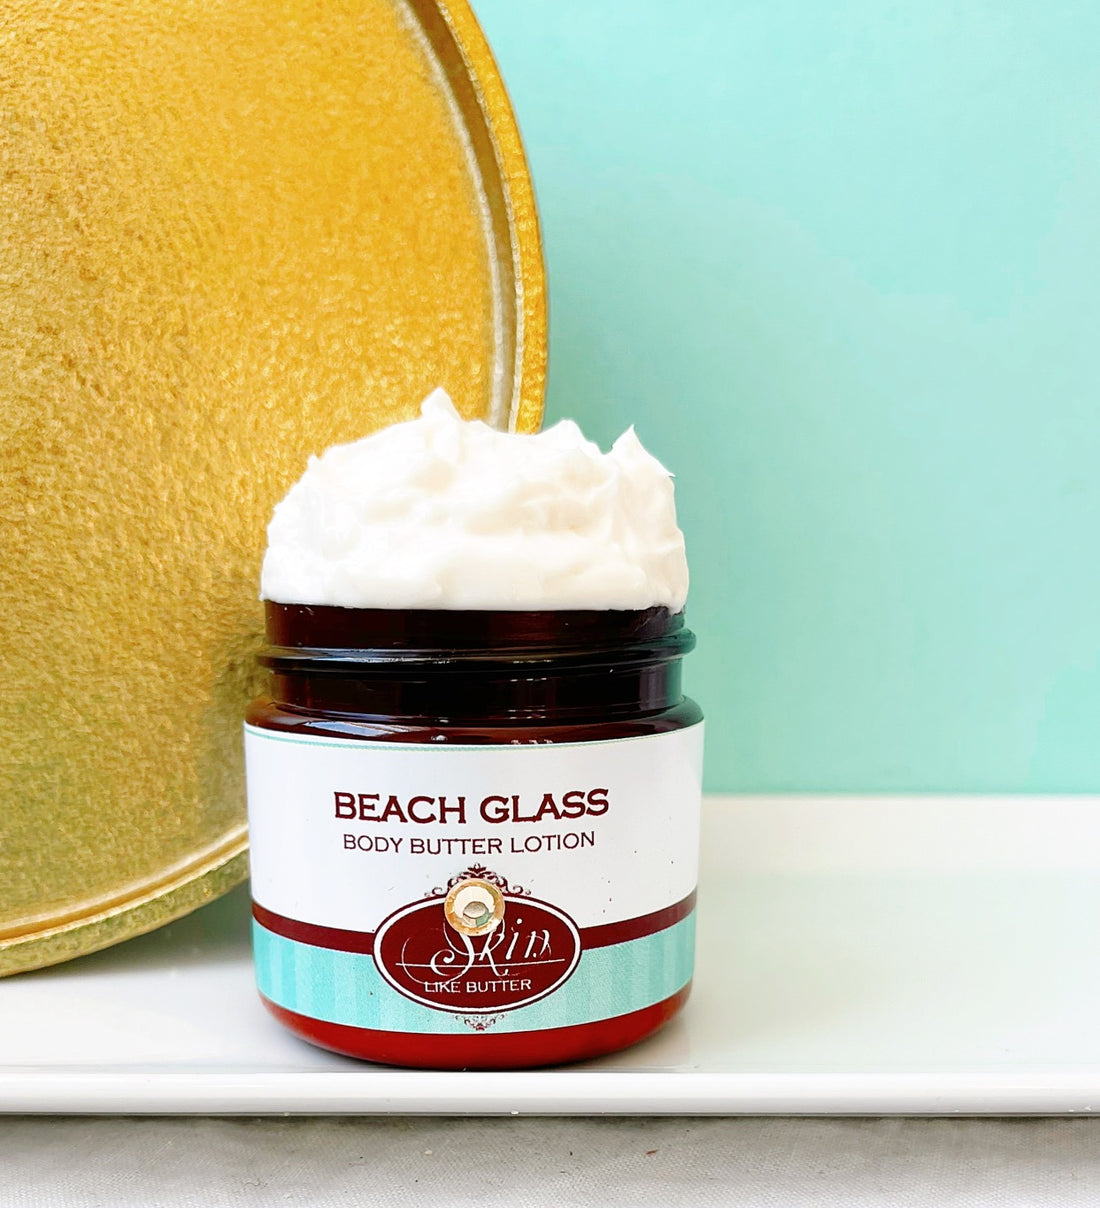 BEACH GLASS scented water free, vegan non-greasy Body Butter Lotion for dry skin